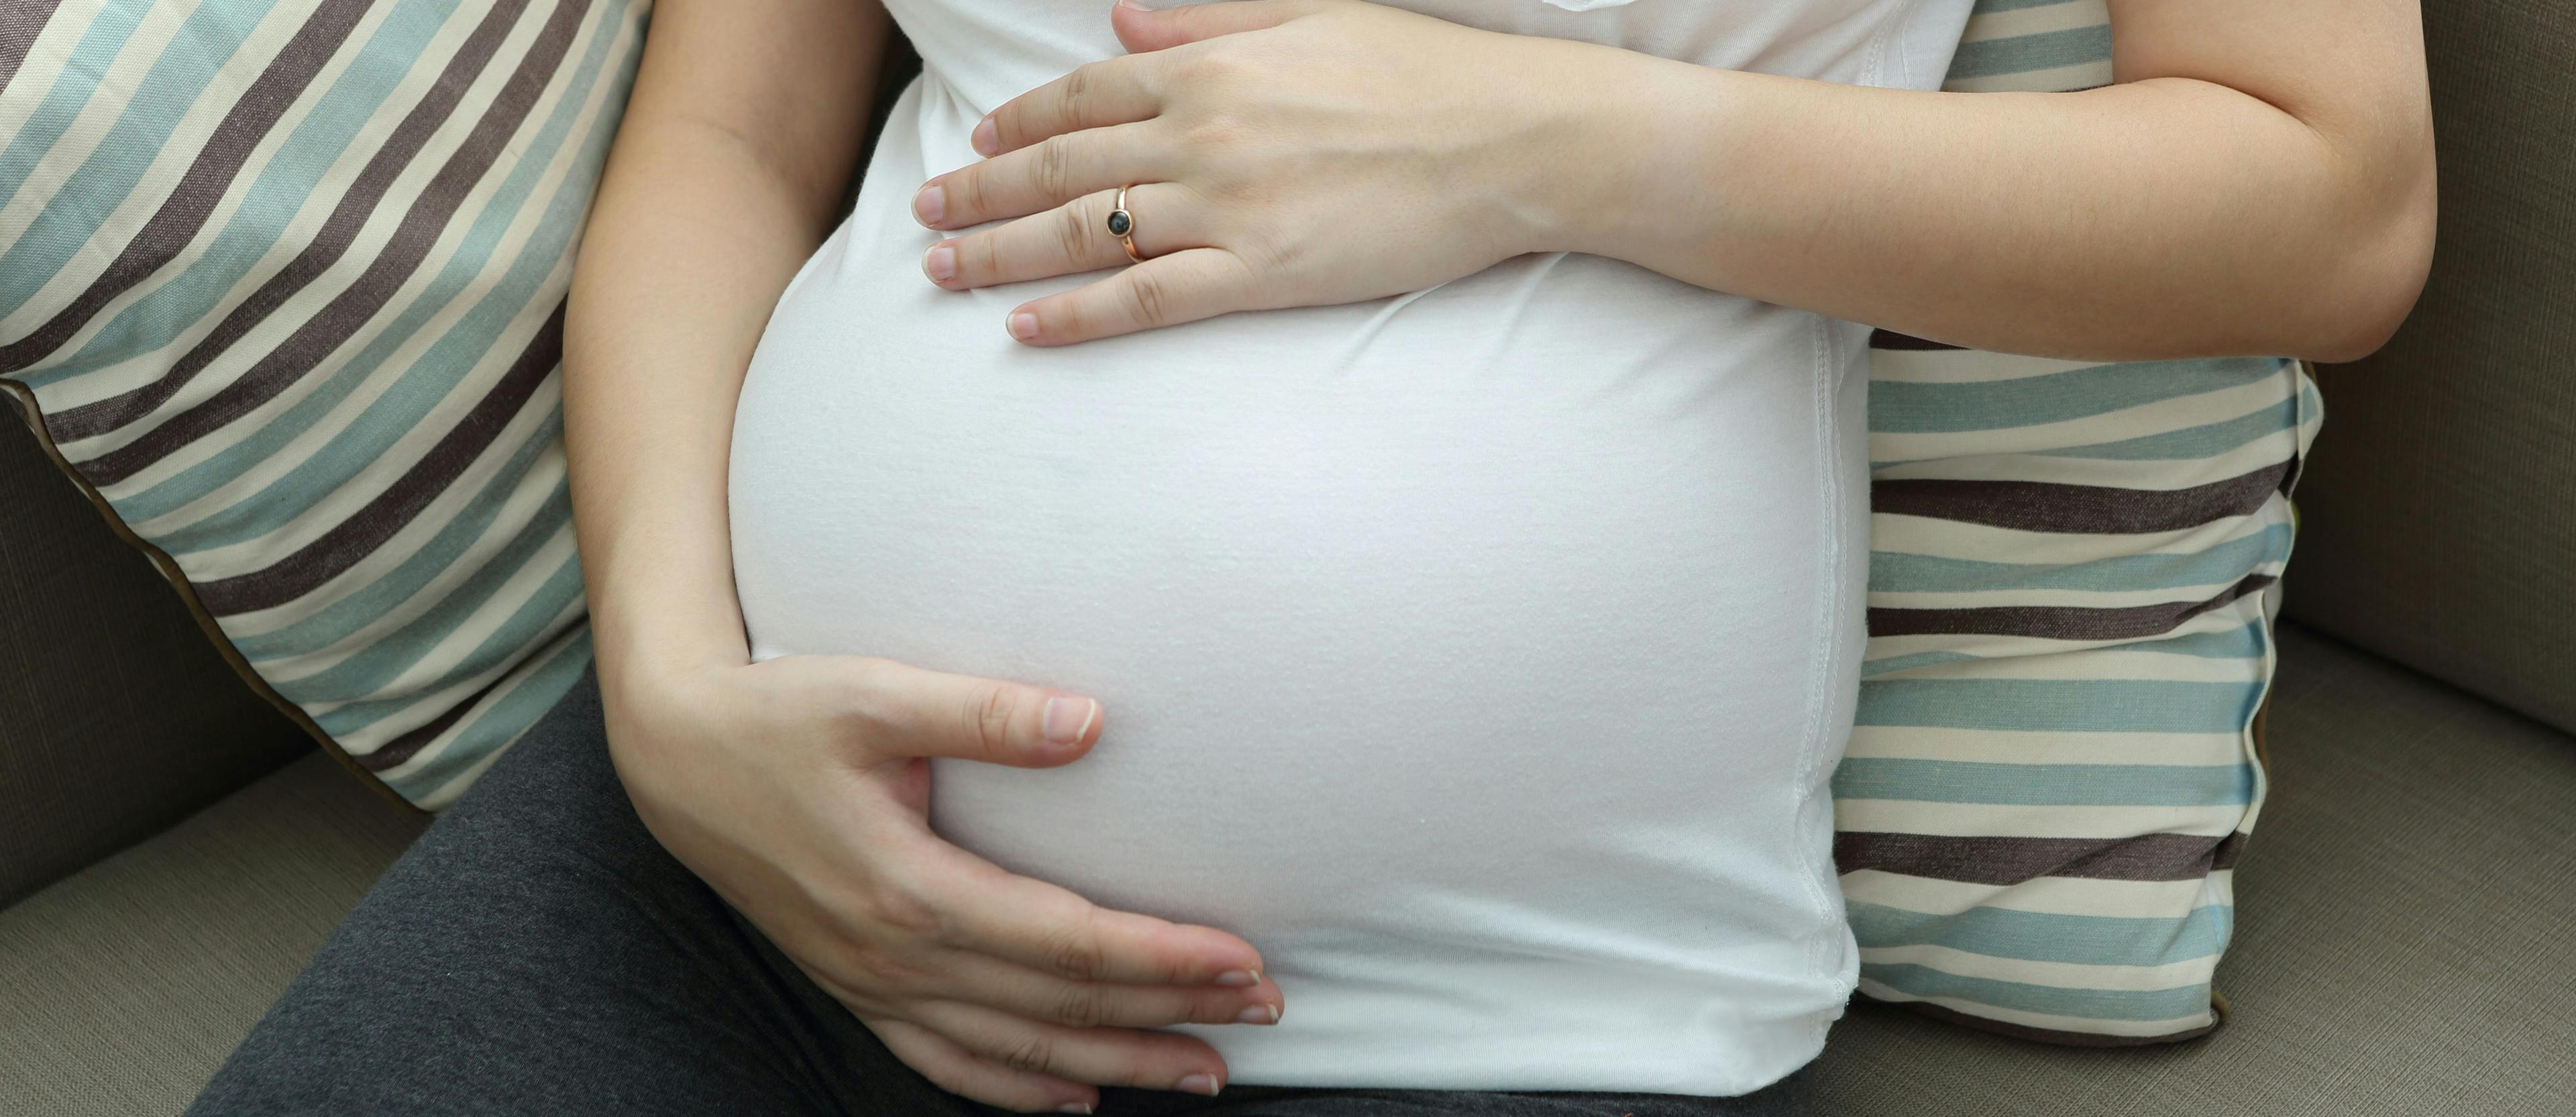 Managing Pregnancy Symptoms: Quick Tips for Relief